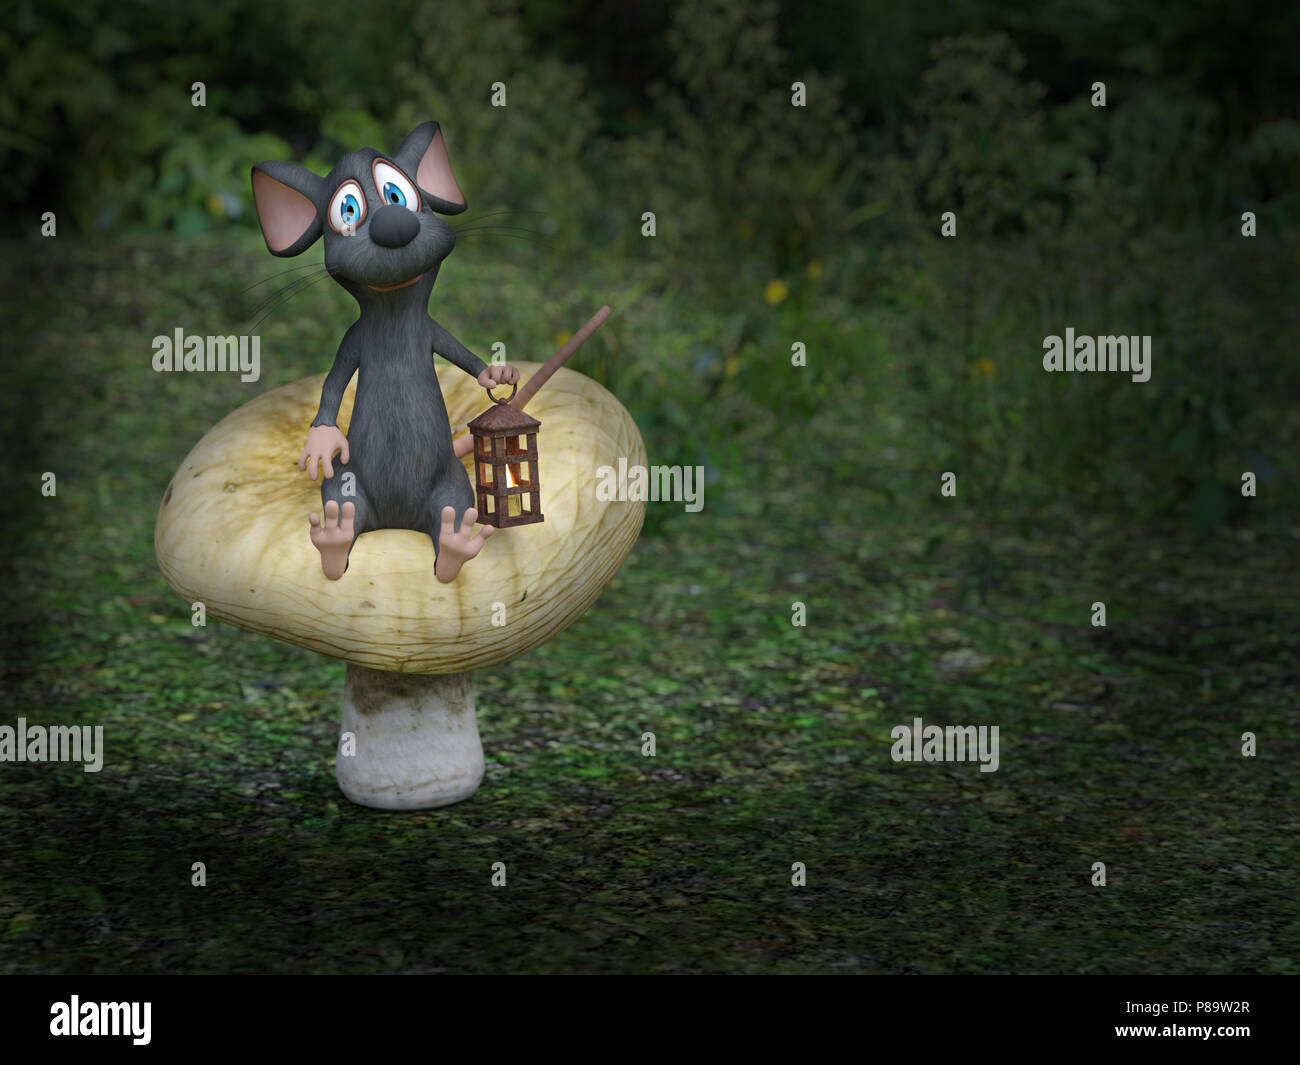 3D rendering of a cute smiling cartoon mouse sitting on a mushroom, holding a lantern in a fairytale toadstool forest at night. Stock Photo